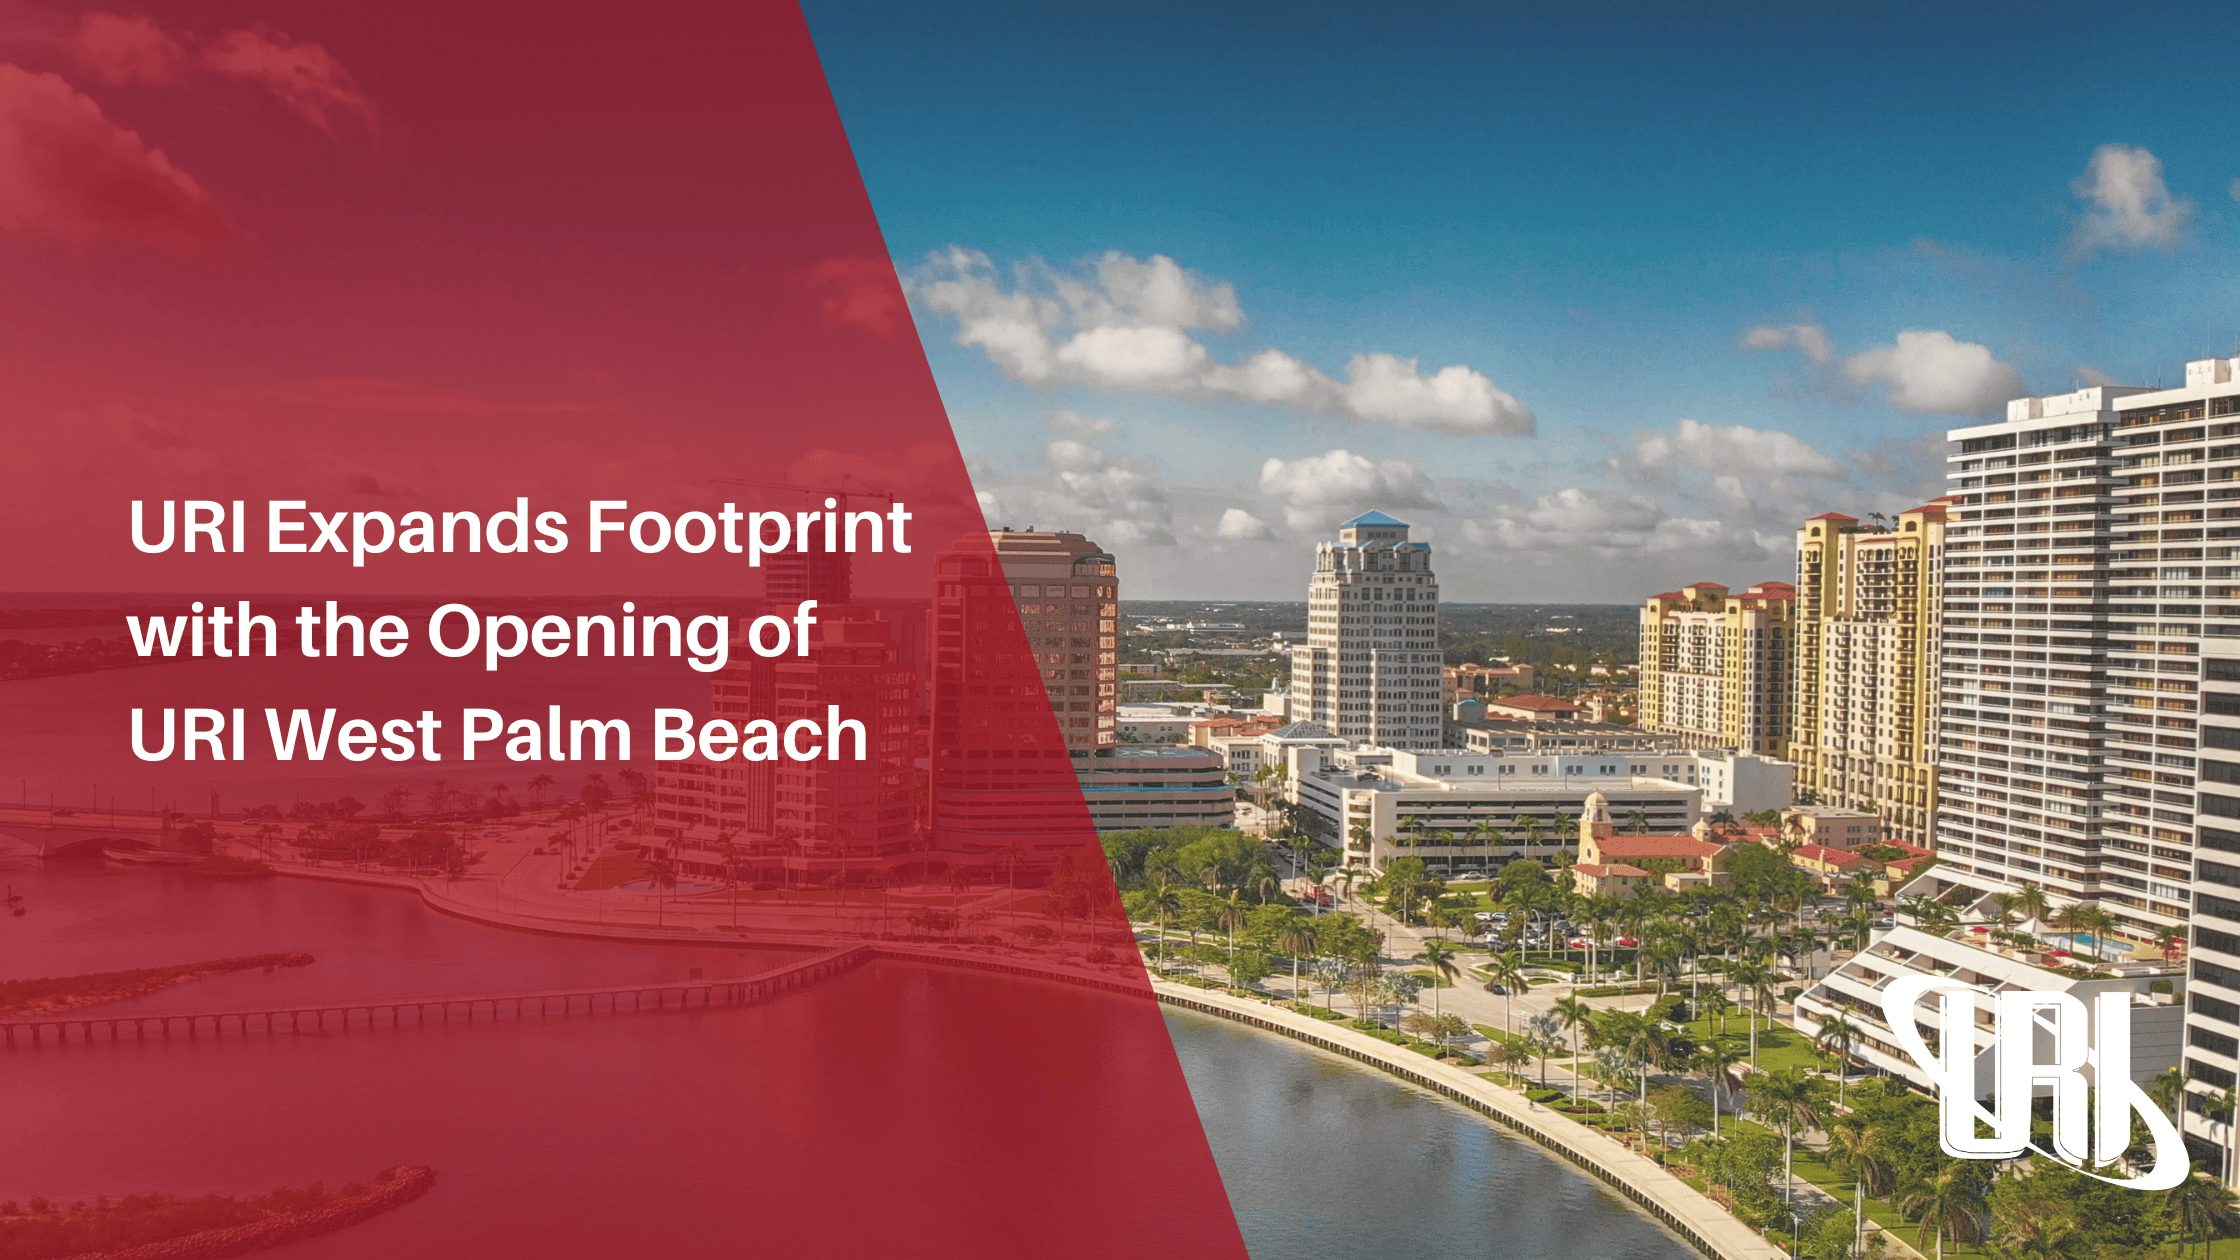 URI Expands Footprint with the Opening of URI West Palm Beach